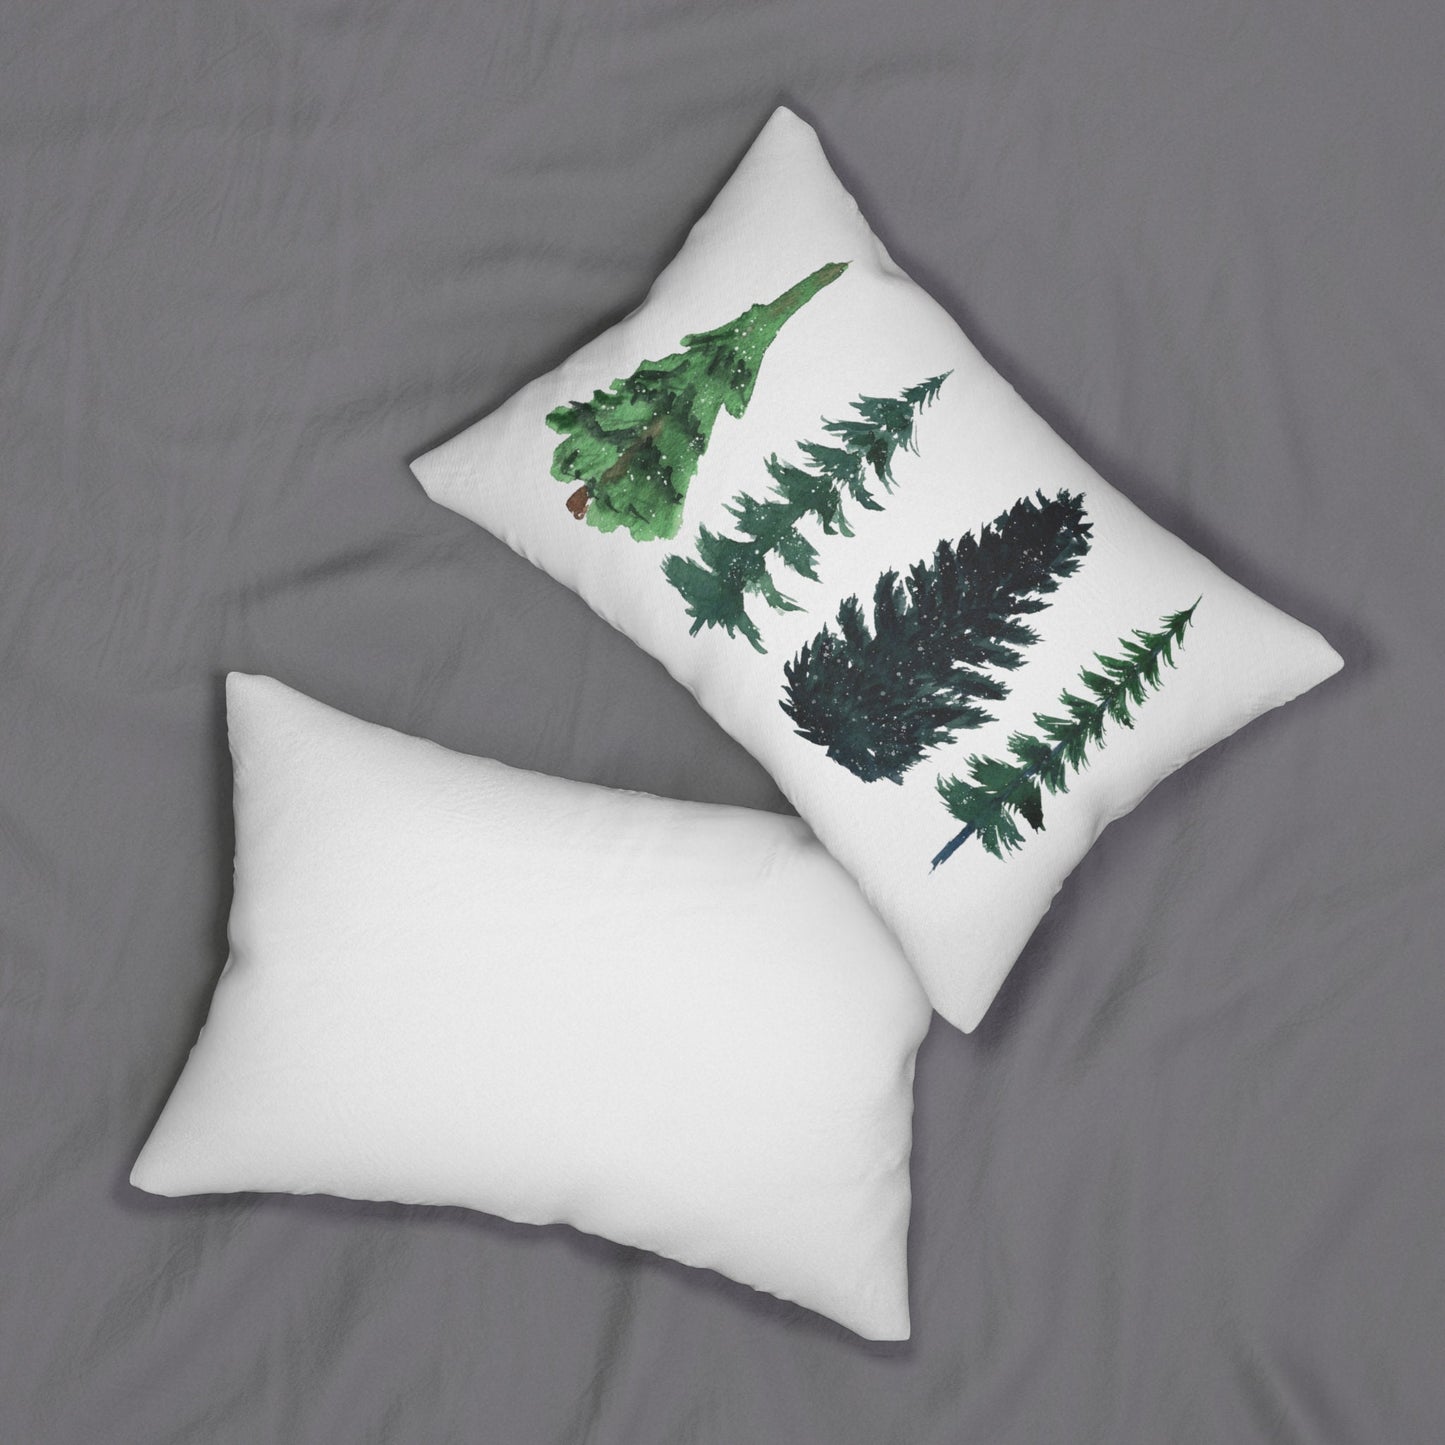 Cute Winter Wonderland Lumbar Pillow with Evergreen Trees and Snowflakes, Evergreen Pillow, Pine Tree Pillow